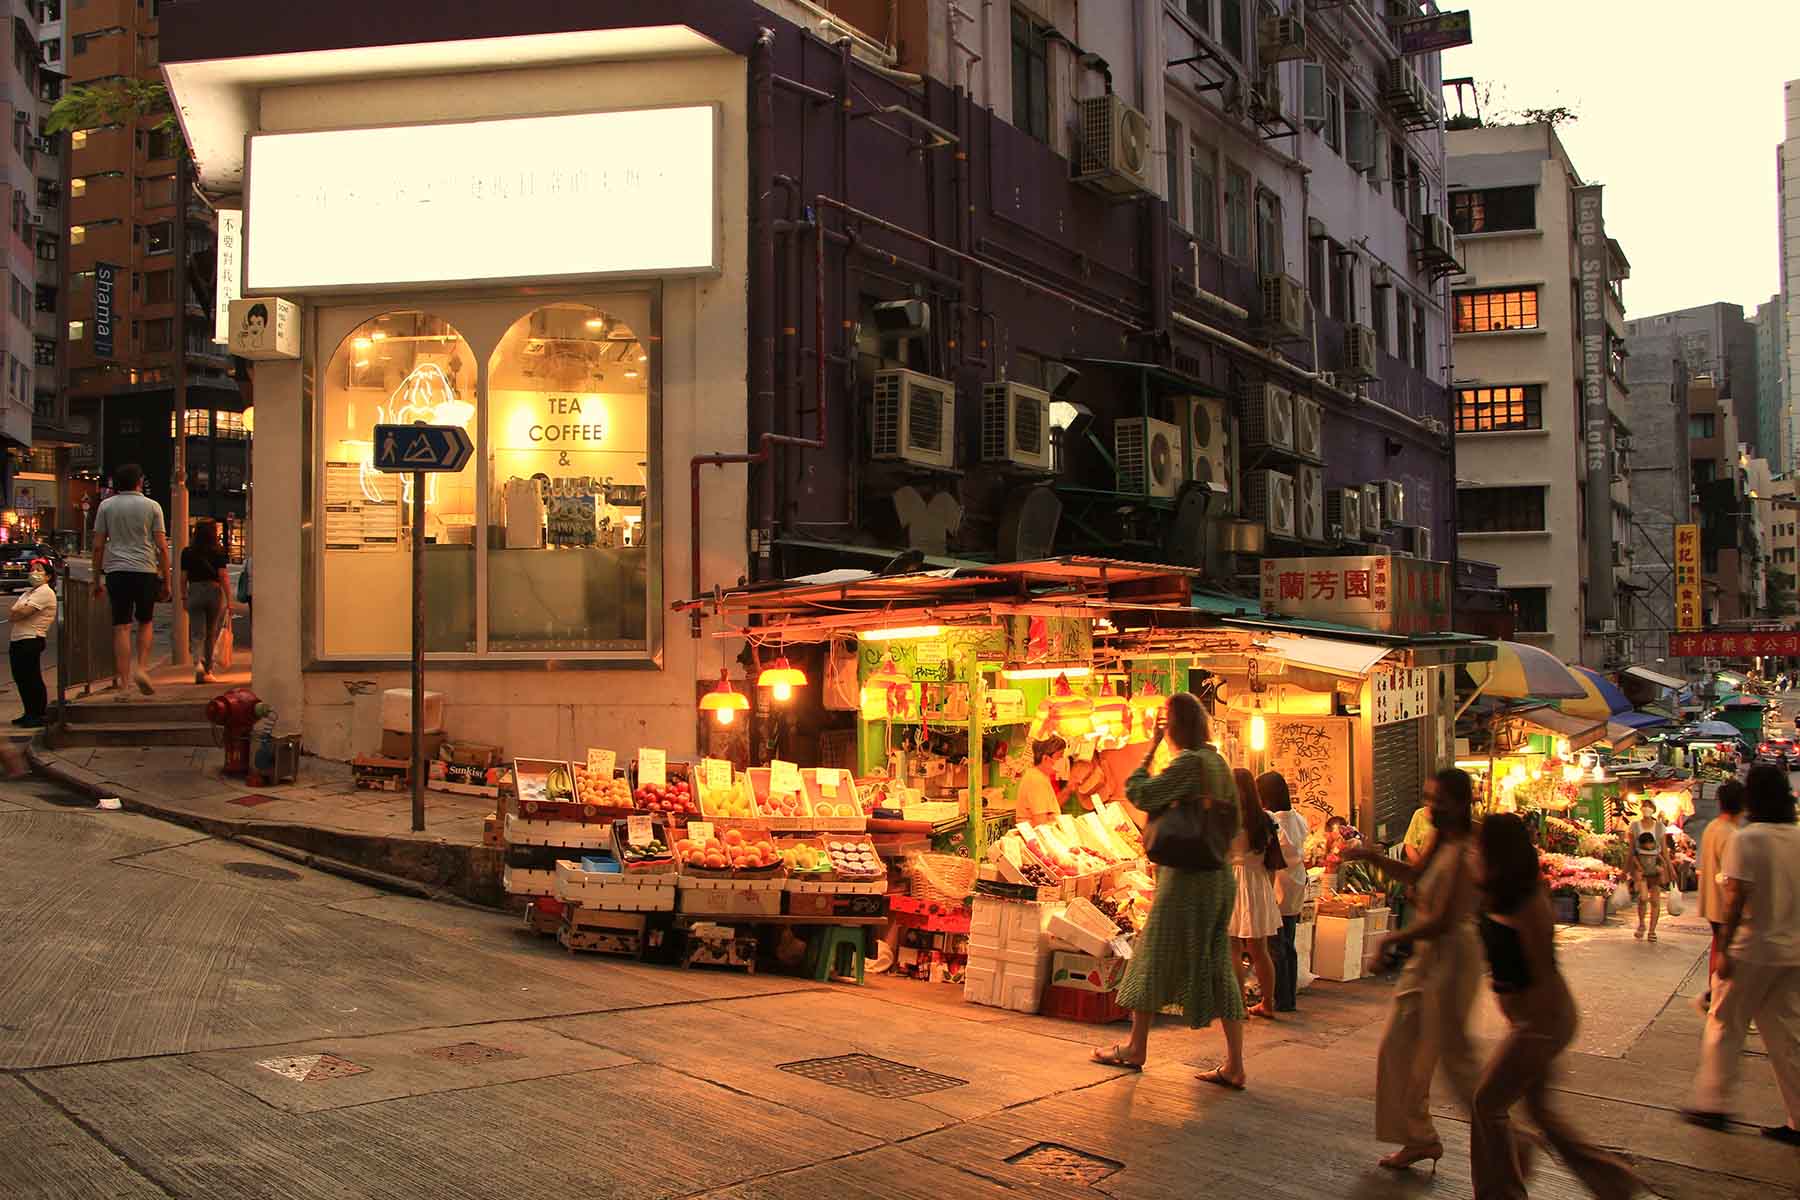 In the evening, people walk past a small fruit market illuminated by yellow light near a tea and coffee shop in Hong Kong.